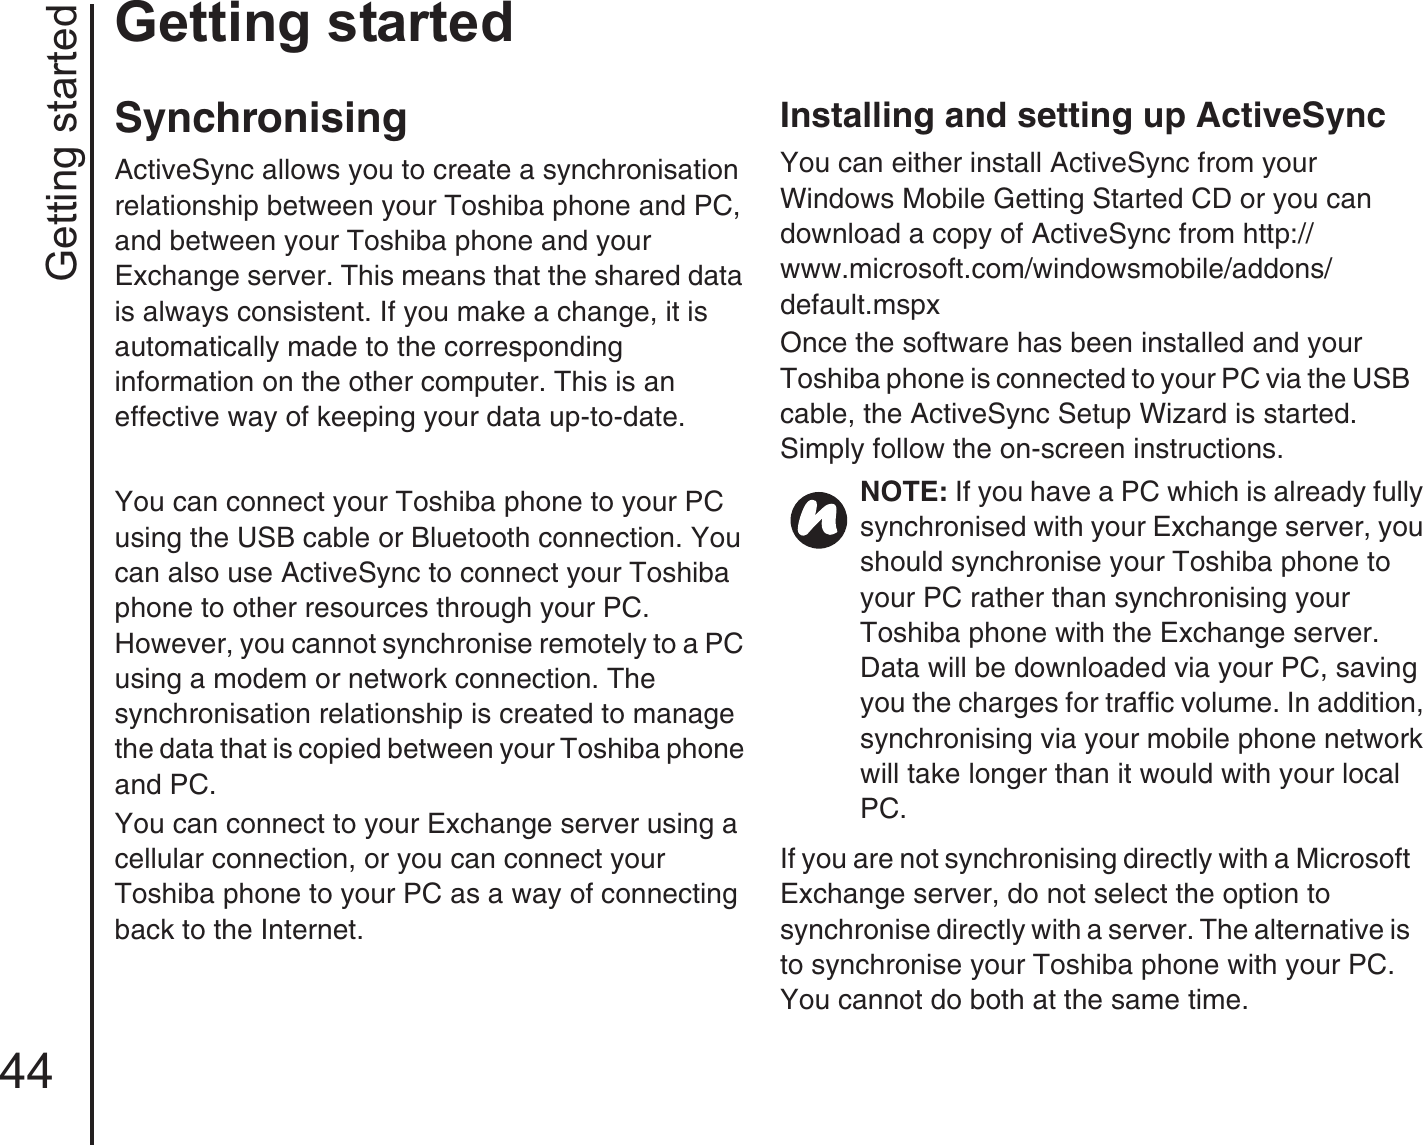 Getting started44Getting startedSynchronisingActiveSync allows you to create a synchronisation relationship between your Toshiba phone and PC, and between your Toshiba phone and your Exchange server. This means that the shared data is always consistent. If you make a change, it is automatically made to the corresponding information on the other computer. This is an effective way of keeping your data up-to-date. You can connect your Toshiba phone to your PC using the USB cable or Bluetooth connection. You can also use ActiveSync to connect your Toshiba phone to other resources through your PC. However, you cannot synchronise remotely to a PC using a modem or network connection. The synchronisation relationship is created to manage the data that is copied between your Toshiba phone and PC. You can connect to your Exchange server using a cellular connection, or you can connect your Toshiba phone to your PC as a way of connecting back to the Internet.Installing and setting up ActiveSyncYou can either install ActiveSync from your Windows Mobile Getting Started CD or you can download a copy of ActiveSync from http://www.microsoft.com/windowsmobile/addons/default.mspxOnce the software has been installed and your Toshiba phone is connected to your PC via the USB cable, the ActiveSync Setup Wizard is started. Simply follow the on-screen instructions.If you are not synchronising directly with a Microsoft Exchange server, do not select the option to synchronise directly with a server. The alternative is to synchronise your Toshiba phone with your PC. You cannot do both at the same time. NOTE: If you have a PC which is already fully synchronised with your Exchange server, you should synchronise your Toshiba phone to your PC rather than synchronising your Toshiba phone with the Exchange server. Data will be downloaded via your PC, saving you the charges for traffic volume. In addition, synchronising via your mobile phone network will take longer than it would with your local PC.